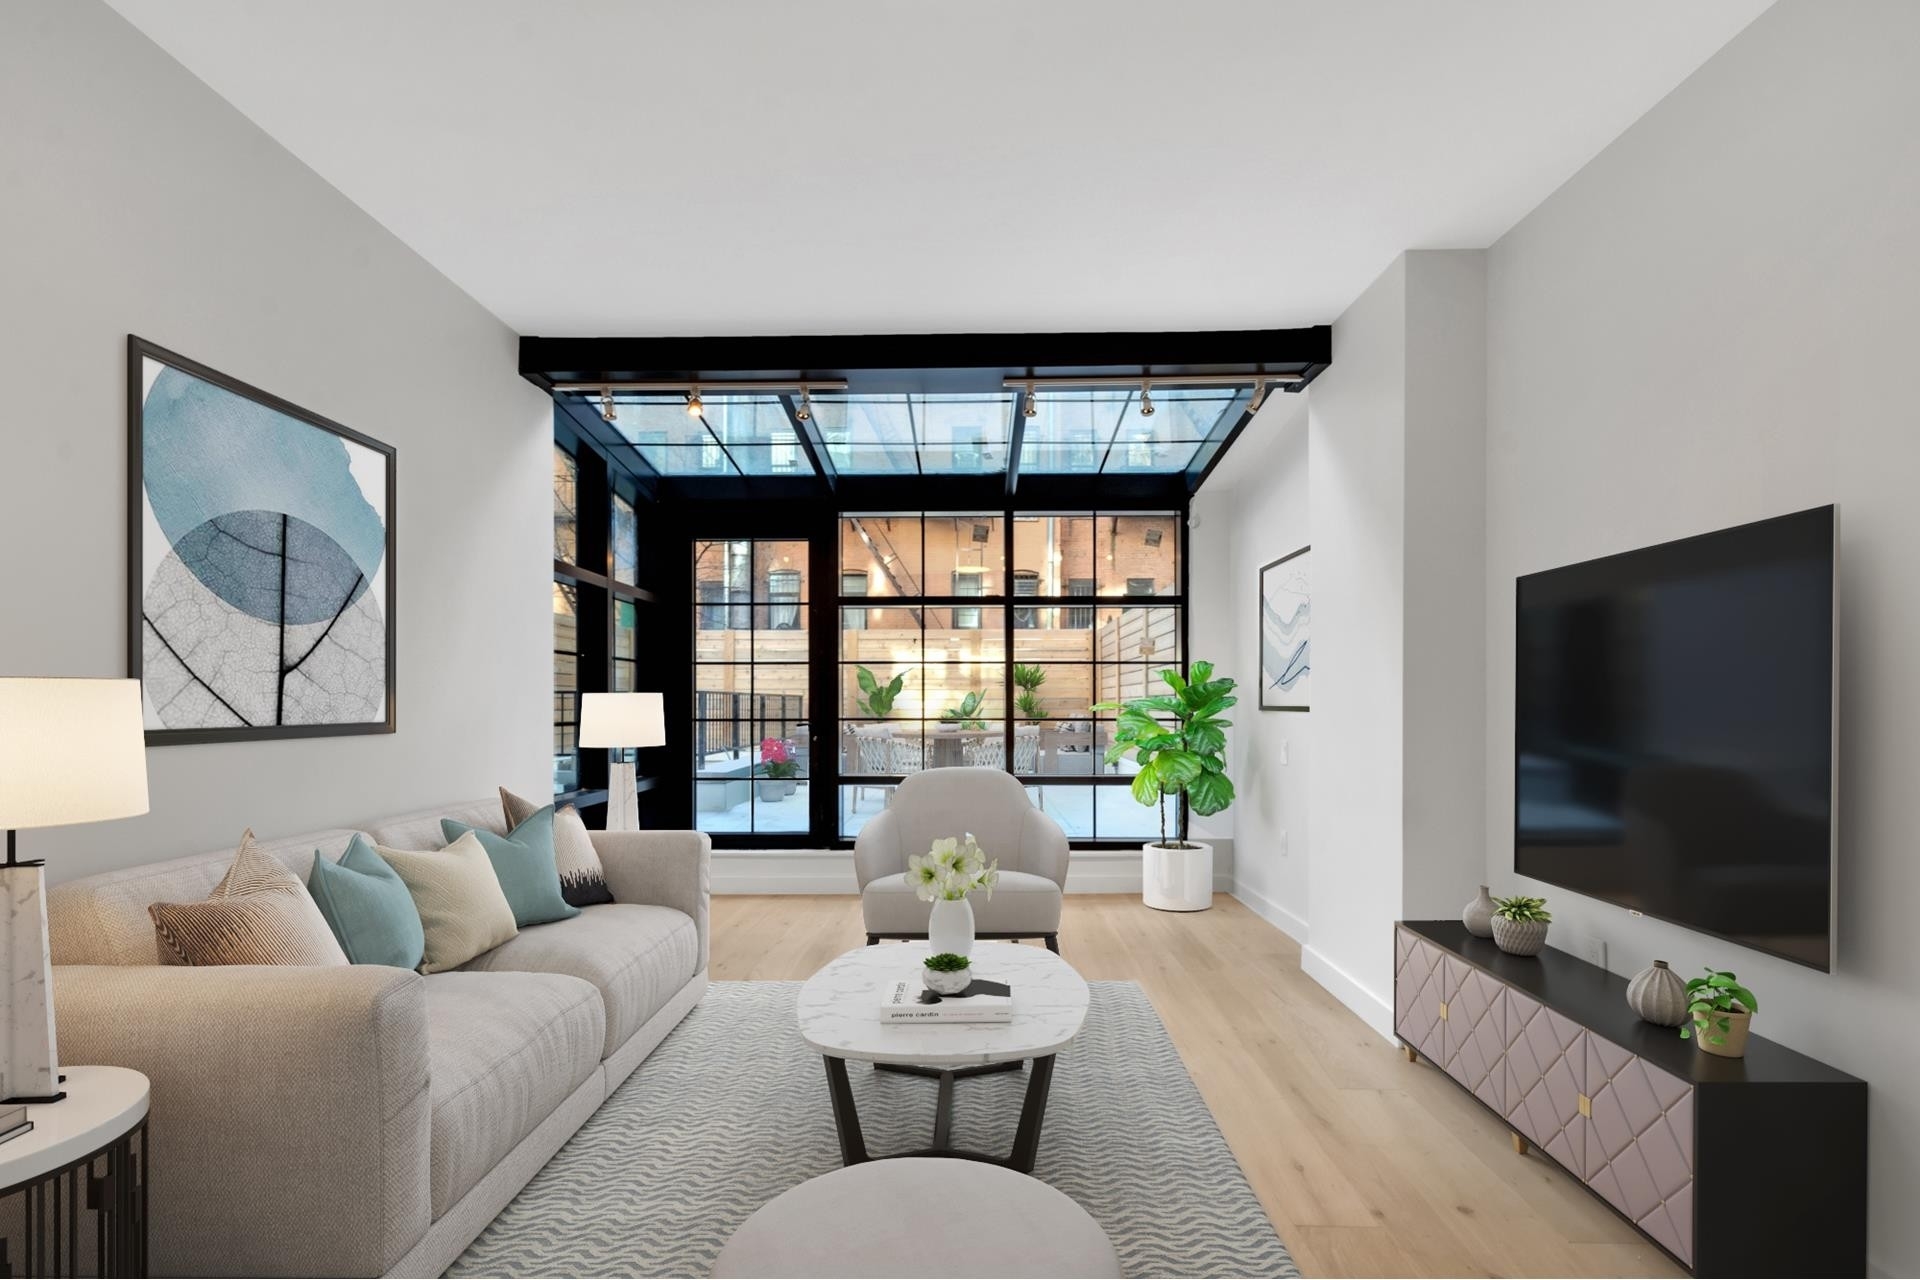 Condominium for Sale at The Marx, 324 E 93RD ST, 101 Yorkville, New York, NY 10128